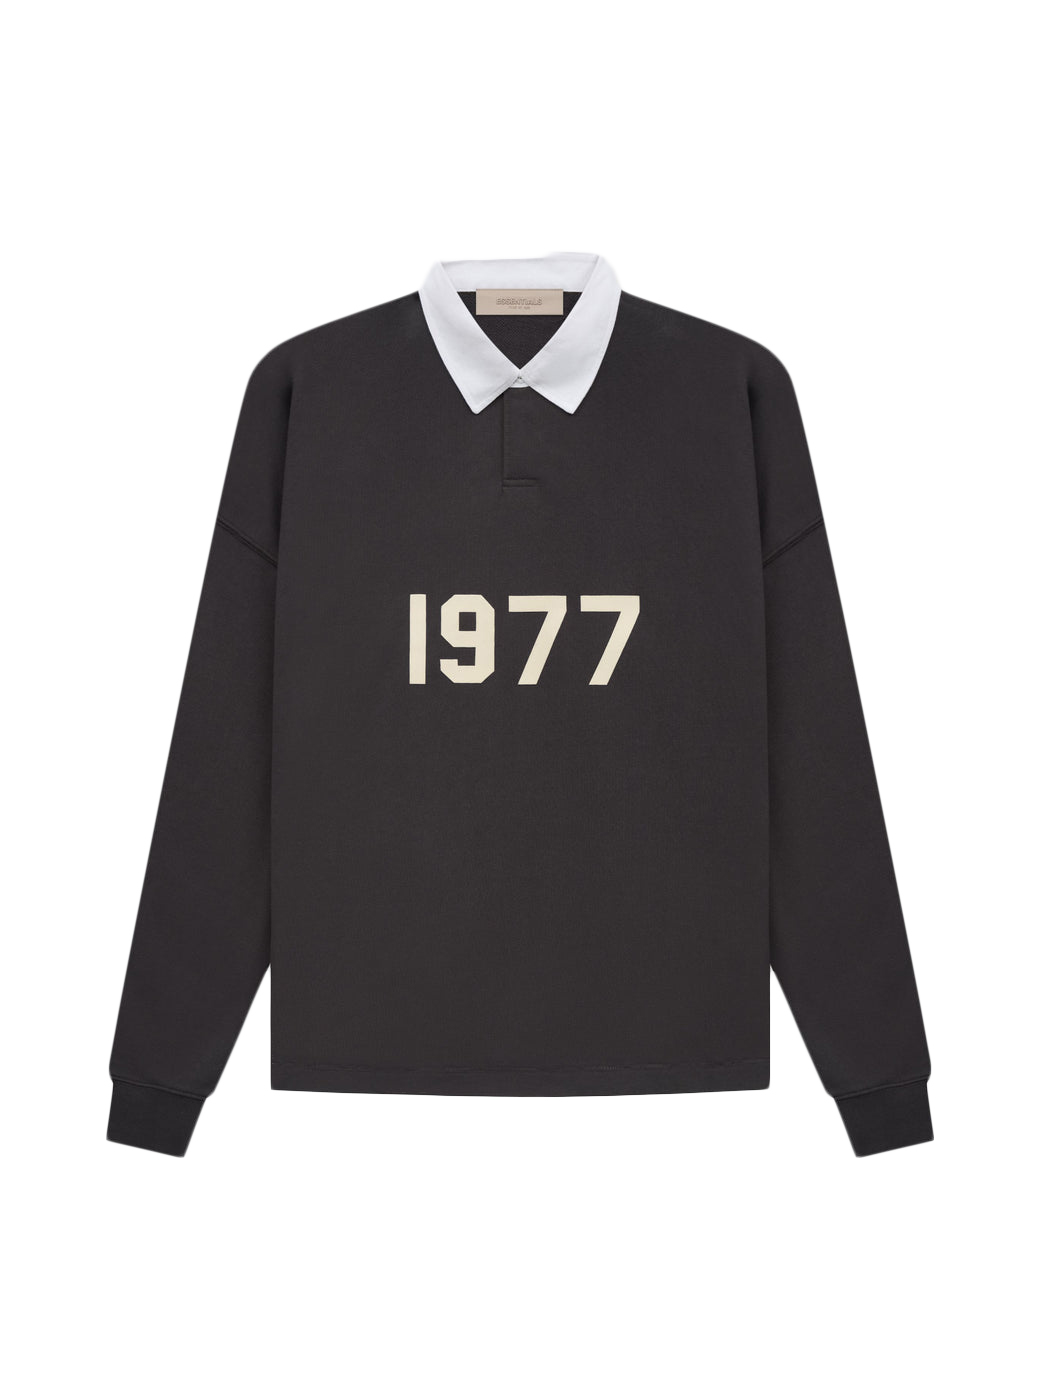 Fear of God Essentials 1977 Rugby Iron